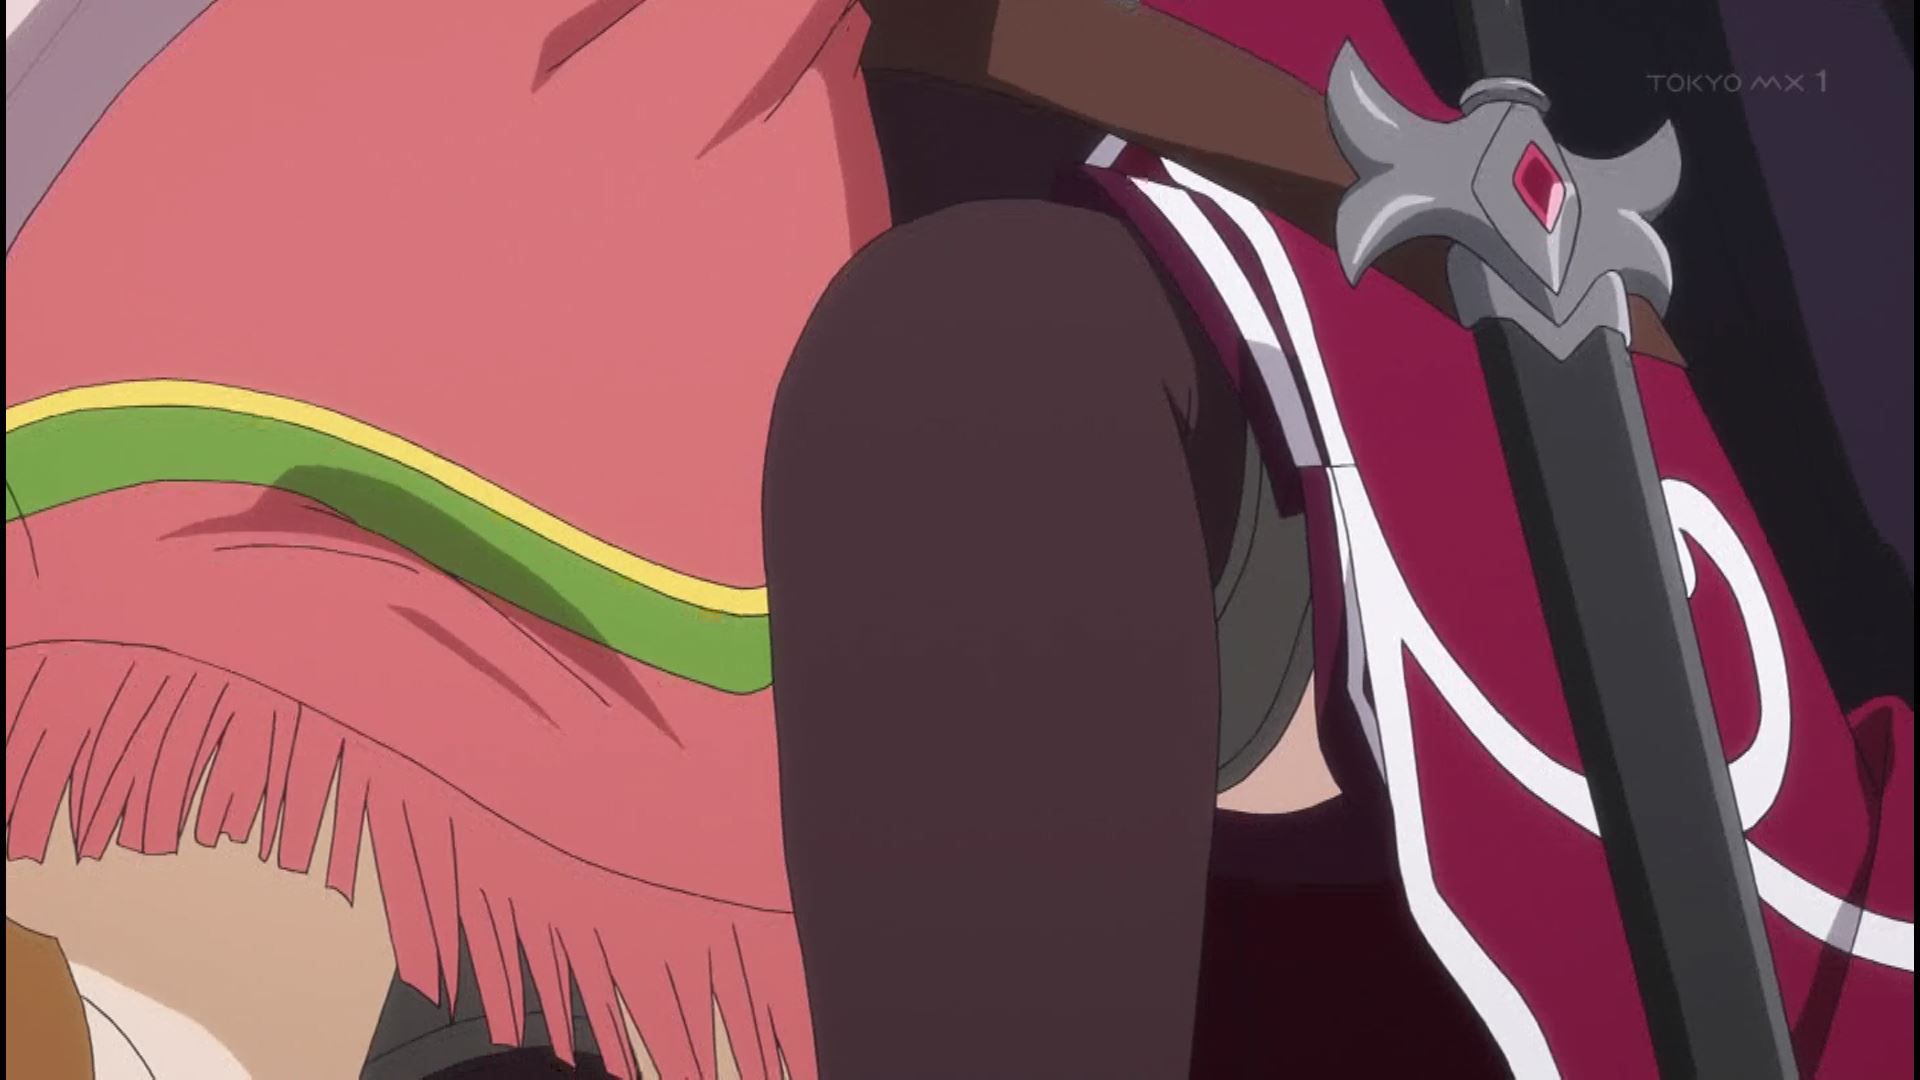 In episode 6 of the anime "Skeleton Knight, I'm Going Out to Another World" a girl takes off her clothes and looks completely naked and erotic 2